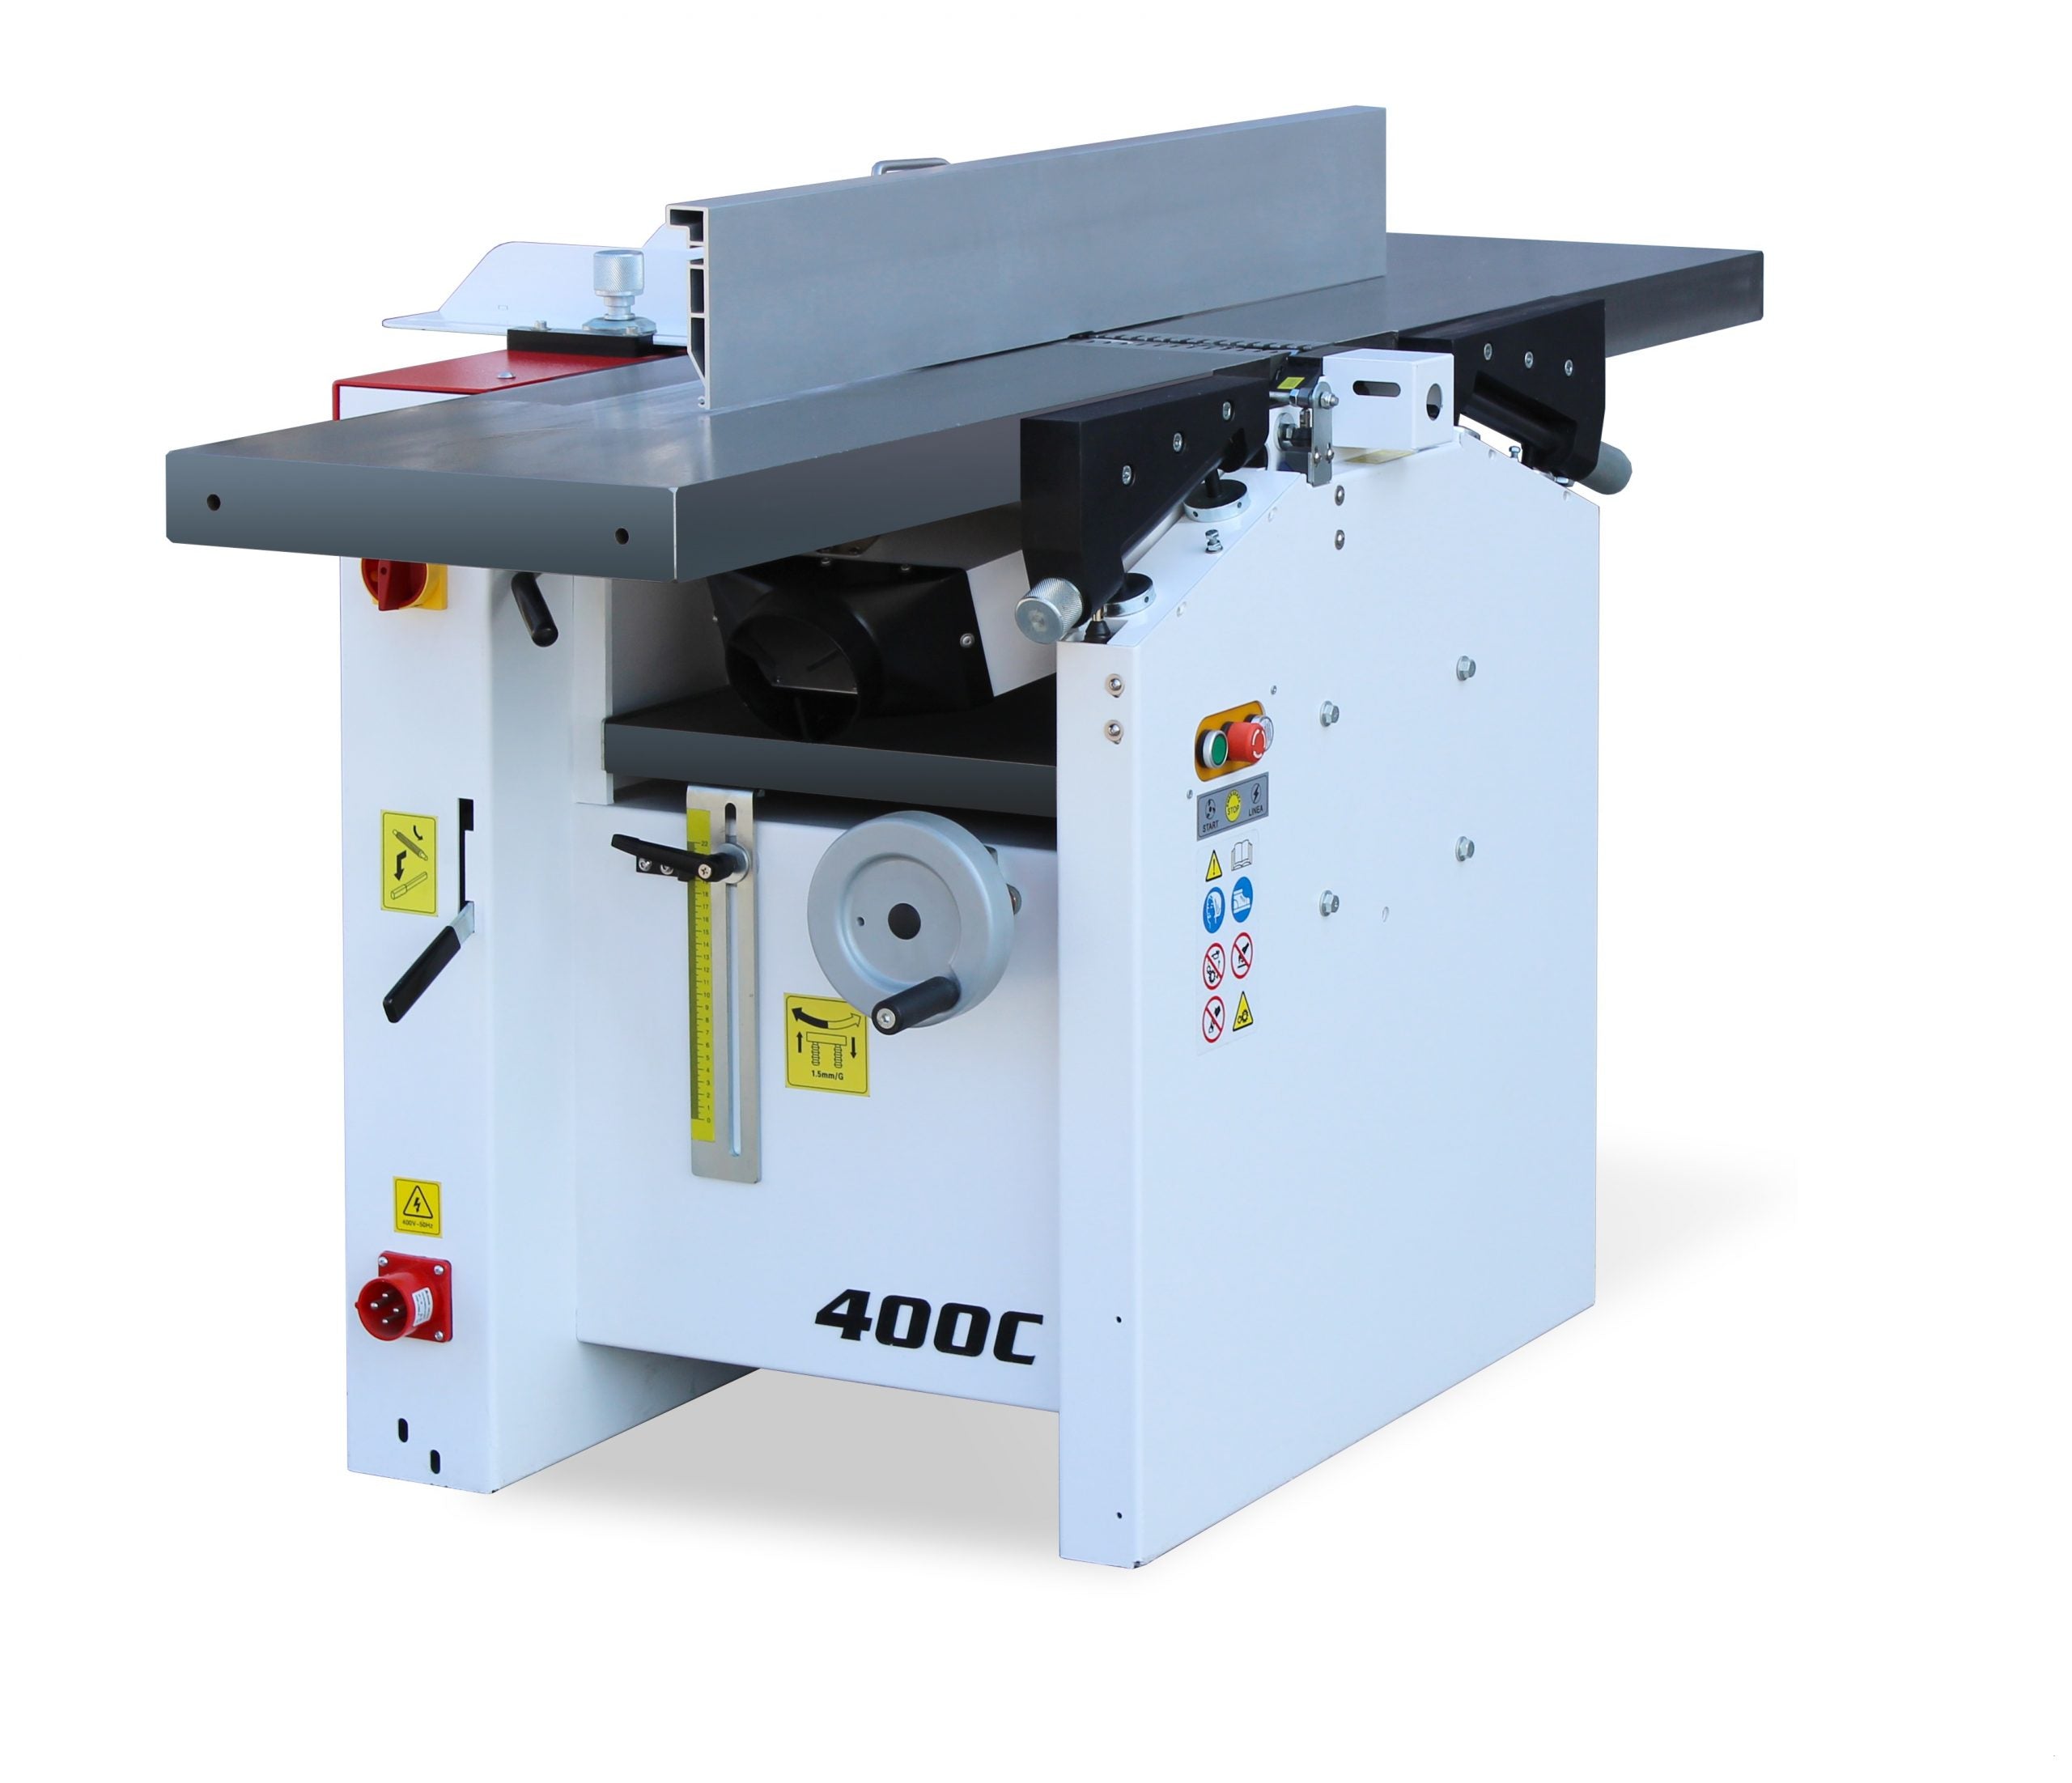 410mm (16") Italian Designed Professional Combination Planer & Thicknesser with Spiral Head Cutter Block 400C 415V by Sicar